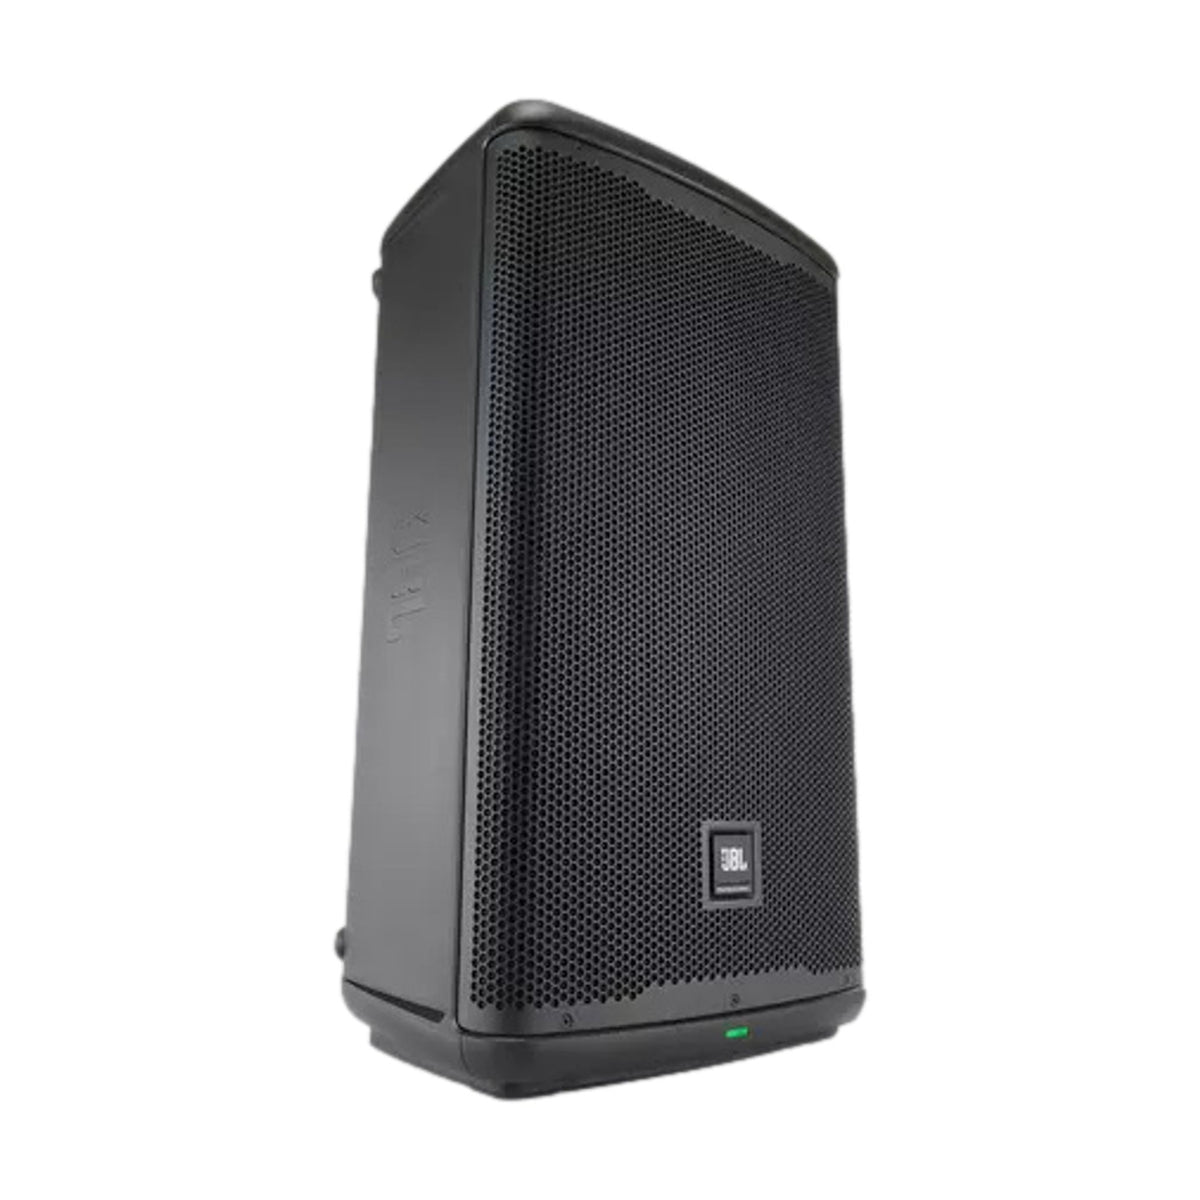 The JBL EON712 12-inch loudspeaker is part of JBL’s new EON700 Series of powered PAs, which represents a major step forward in innovation and technology